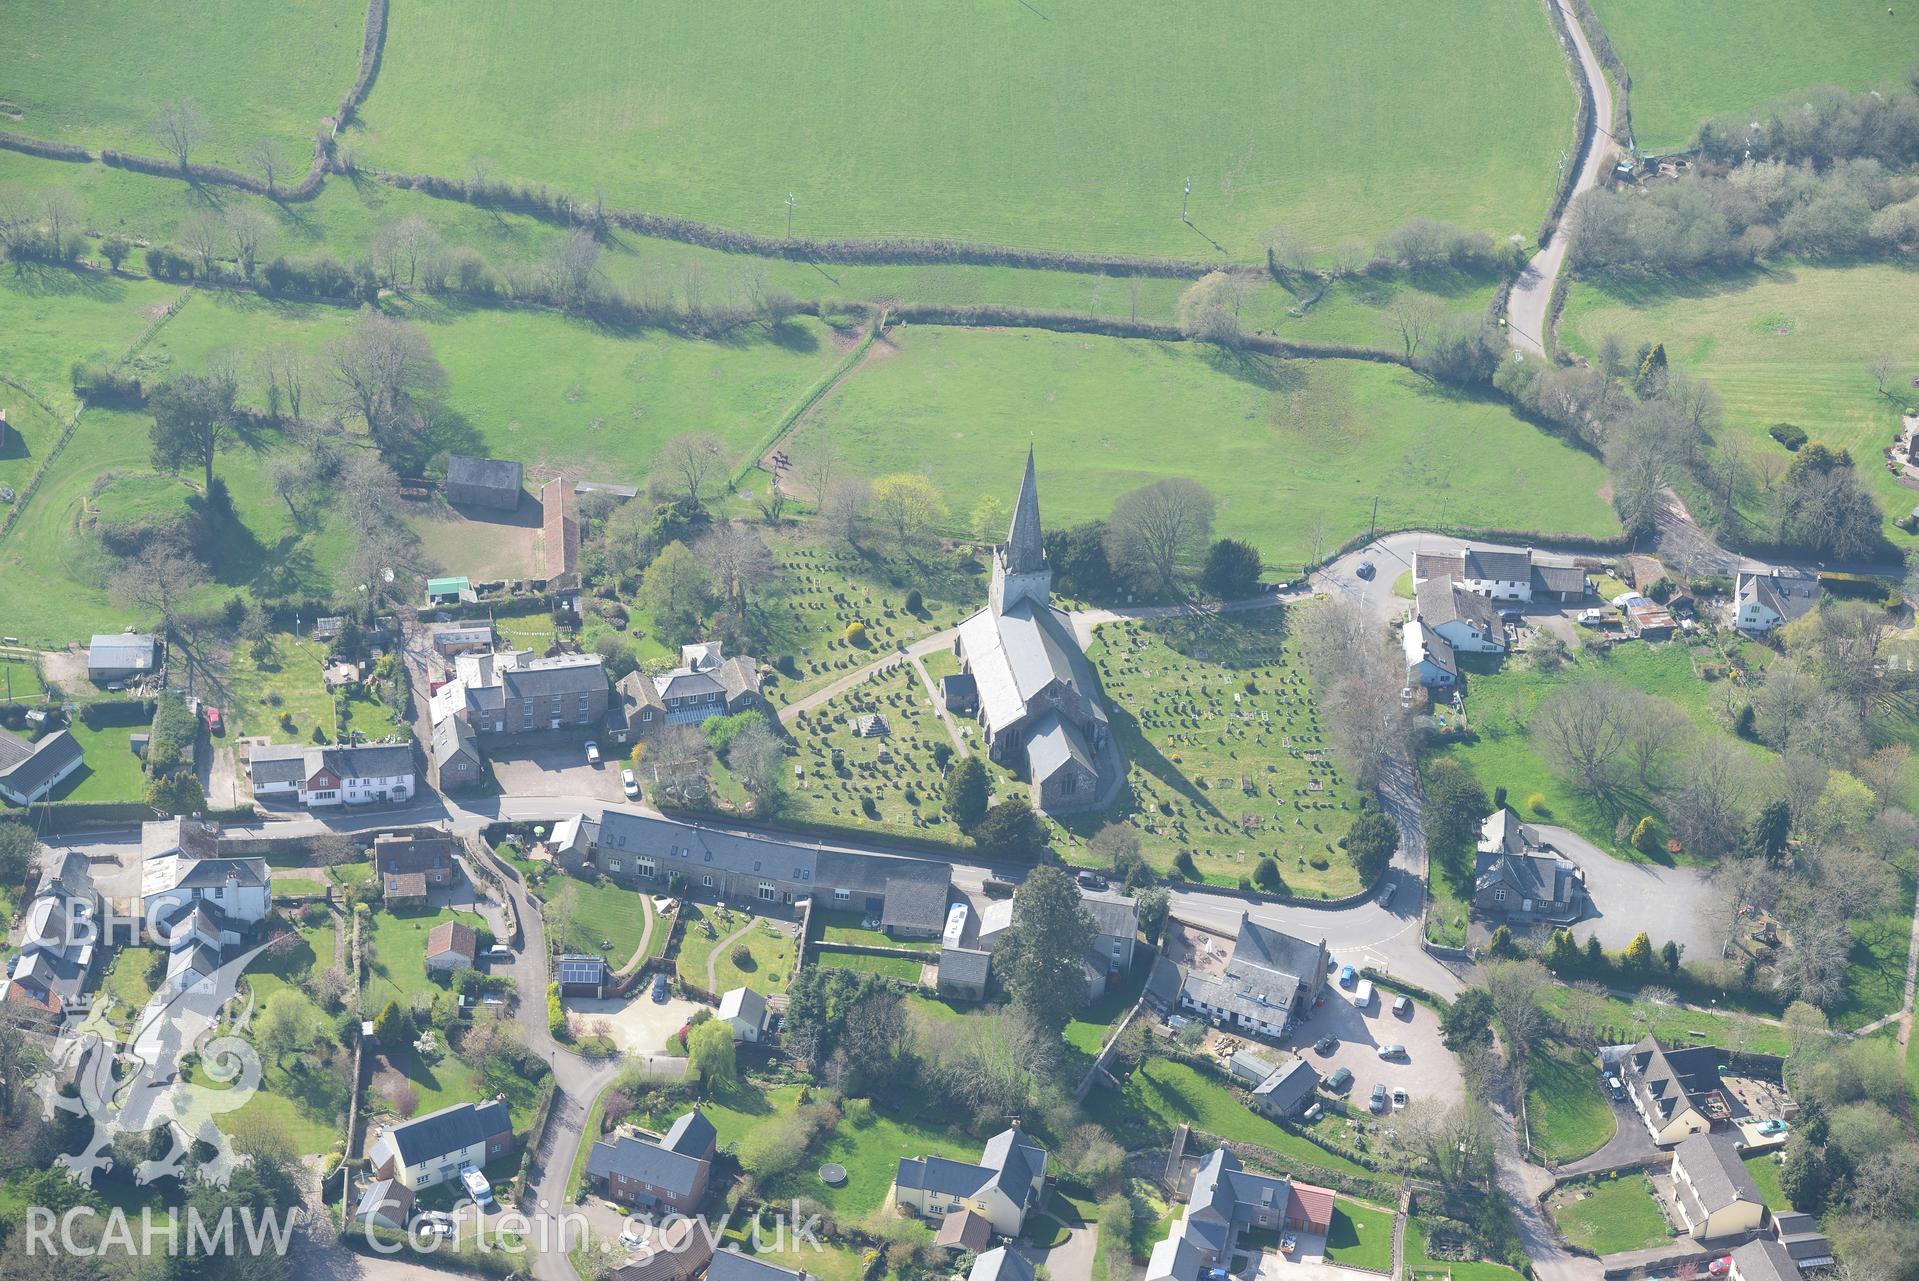 Trellech village and medieval borough including St. Nicholas' Church, Churchyard Cross and Vicarage; medieval houses sites west of the Church; the Lion Inn; old village school; Court Farm; Tump Terret and Trellech motte. Oblique aerial photograph taken during the Royal Commission's programme of archaeological aerial reconnaissance by Toby Driver on 21st April 2015.